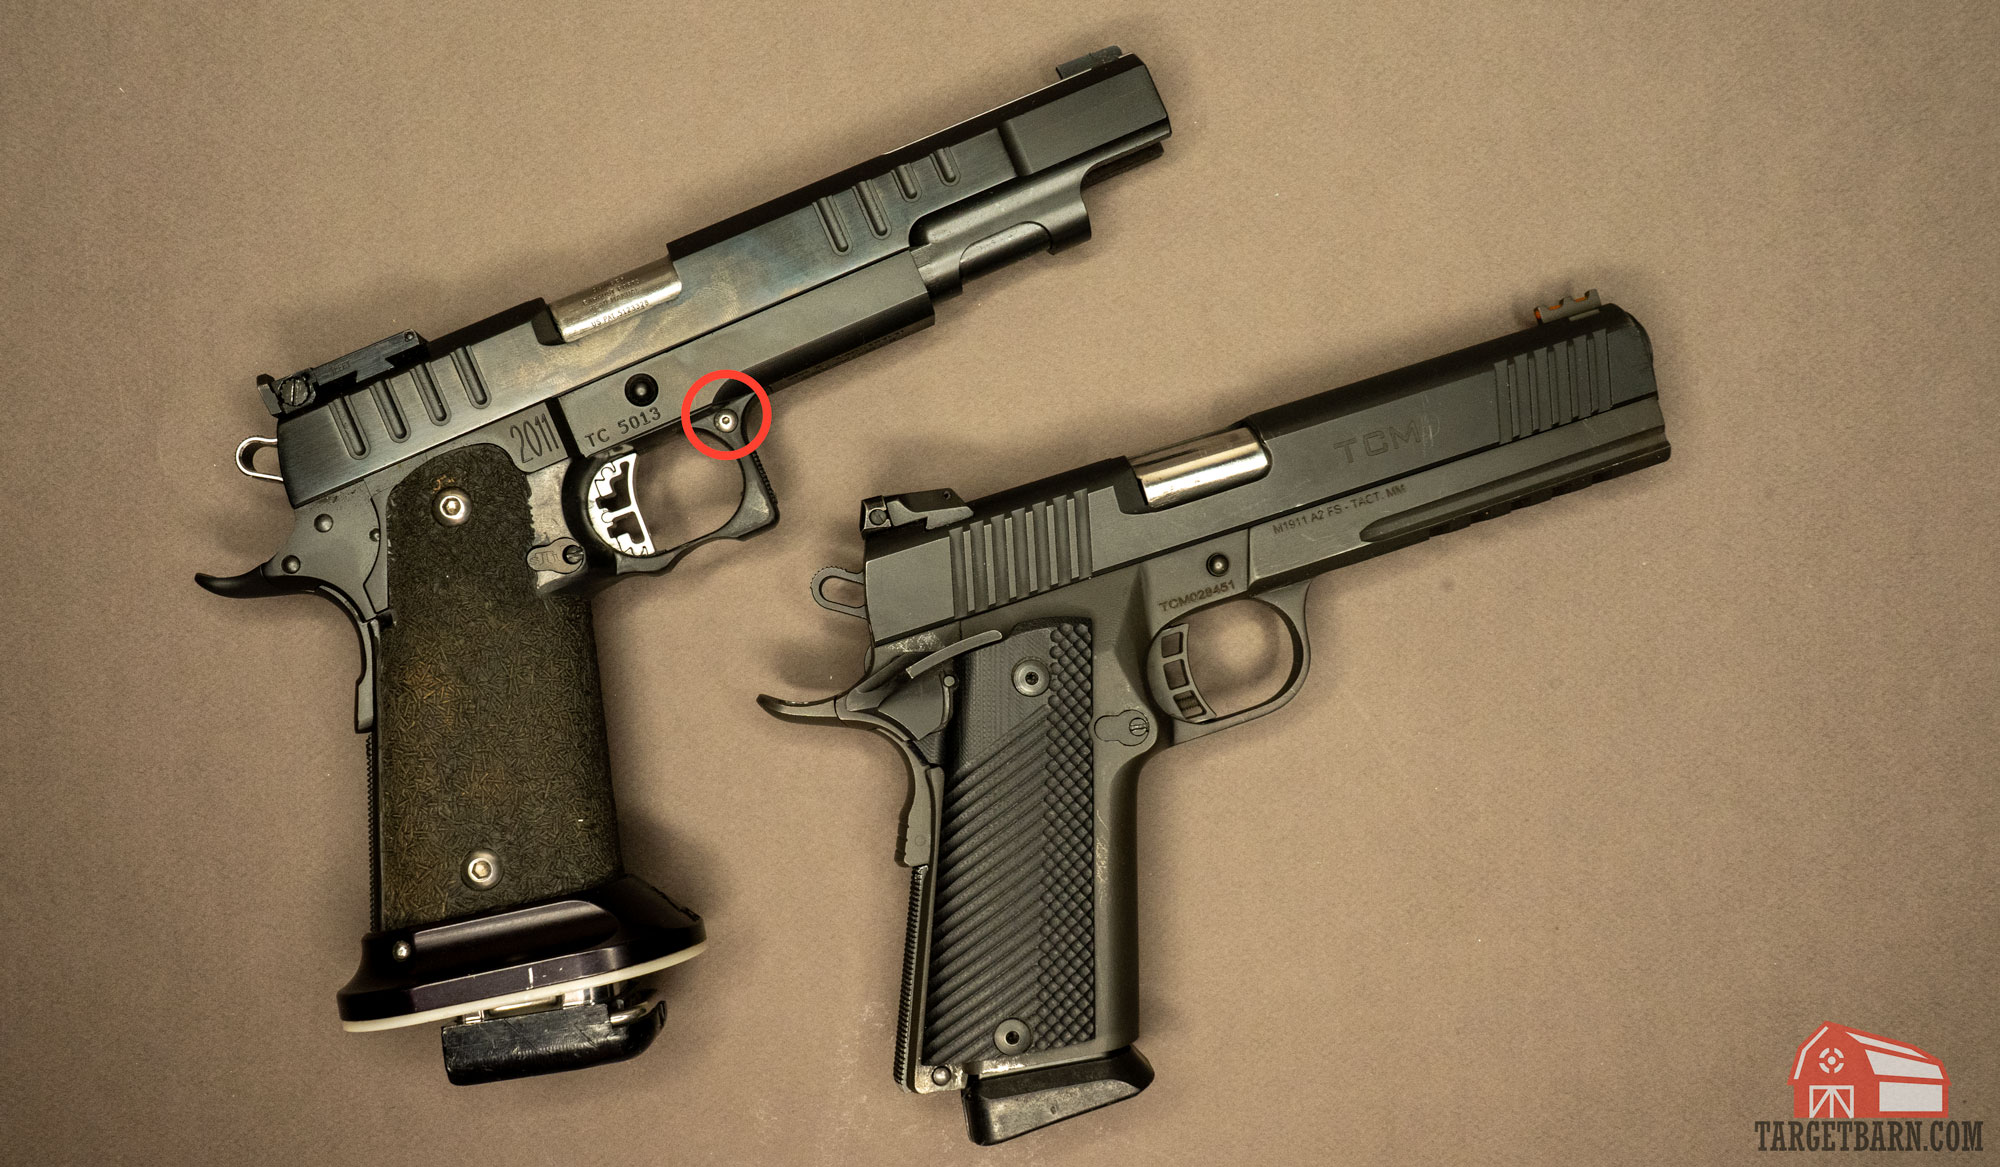 a 2011 and 1911 next to each other, with the screw on the trigger guard of the 2011 circled to show the difference